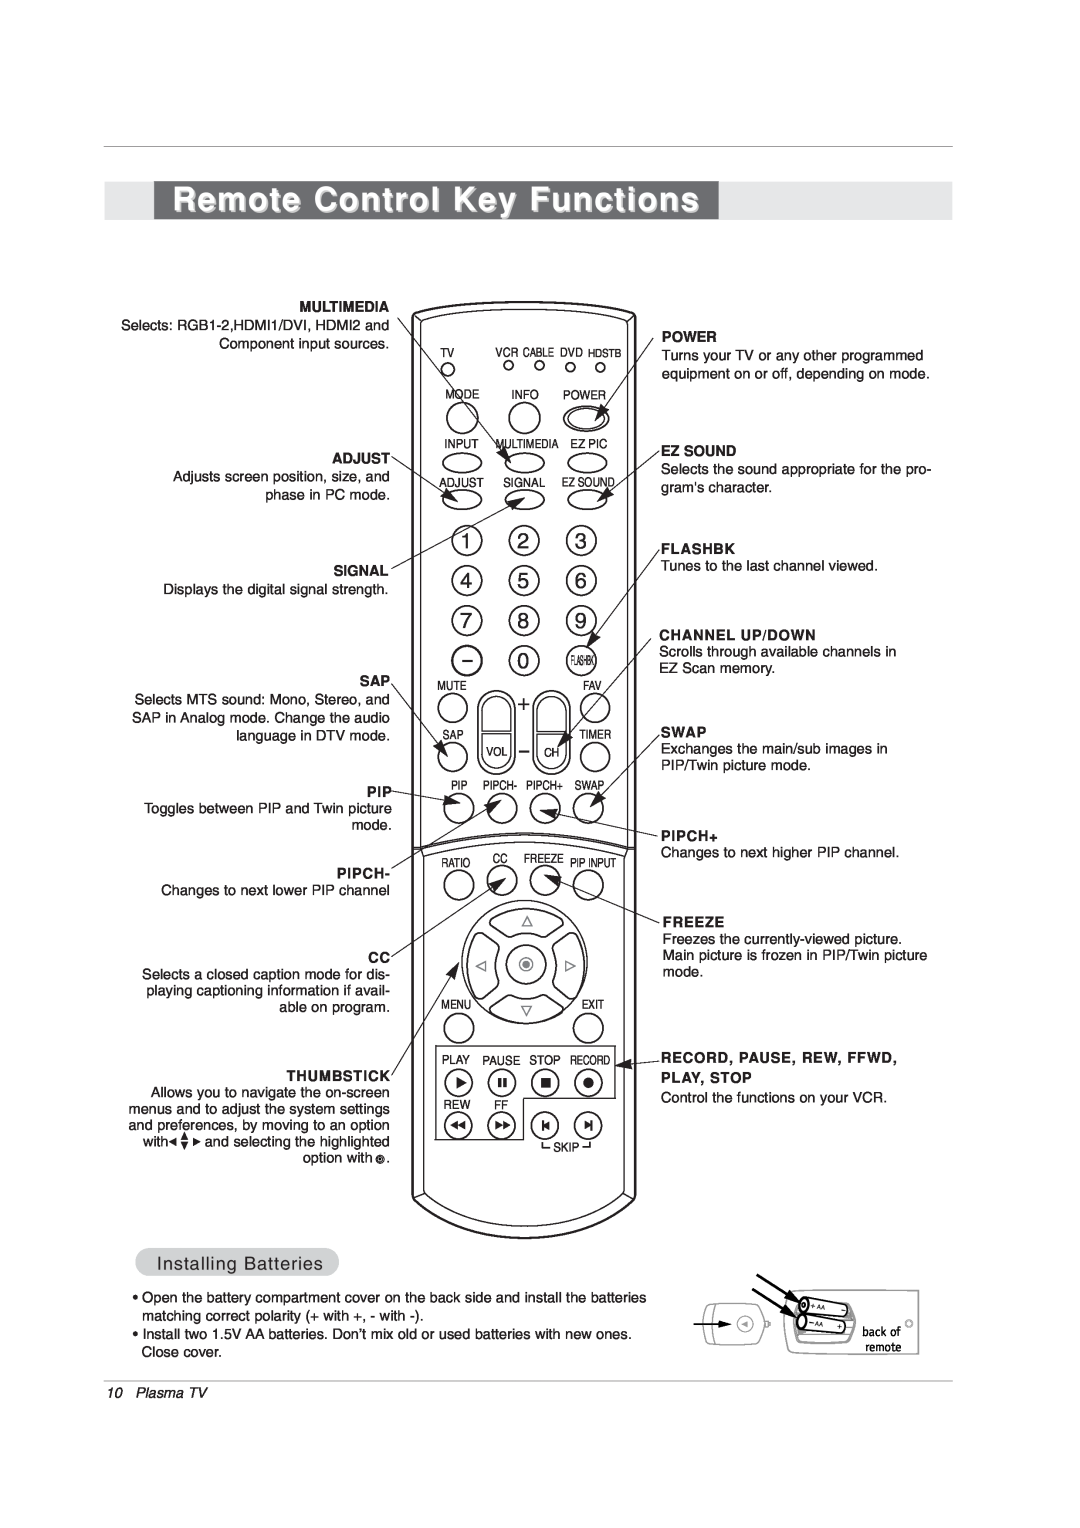 LG Electronics 42PX7DC owner manual Remote Control Key Functions, 1 2 4 5 7 8, Installing Batteries, Plasma TV 